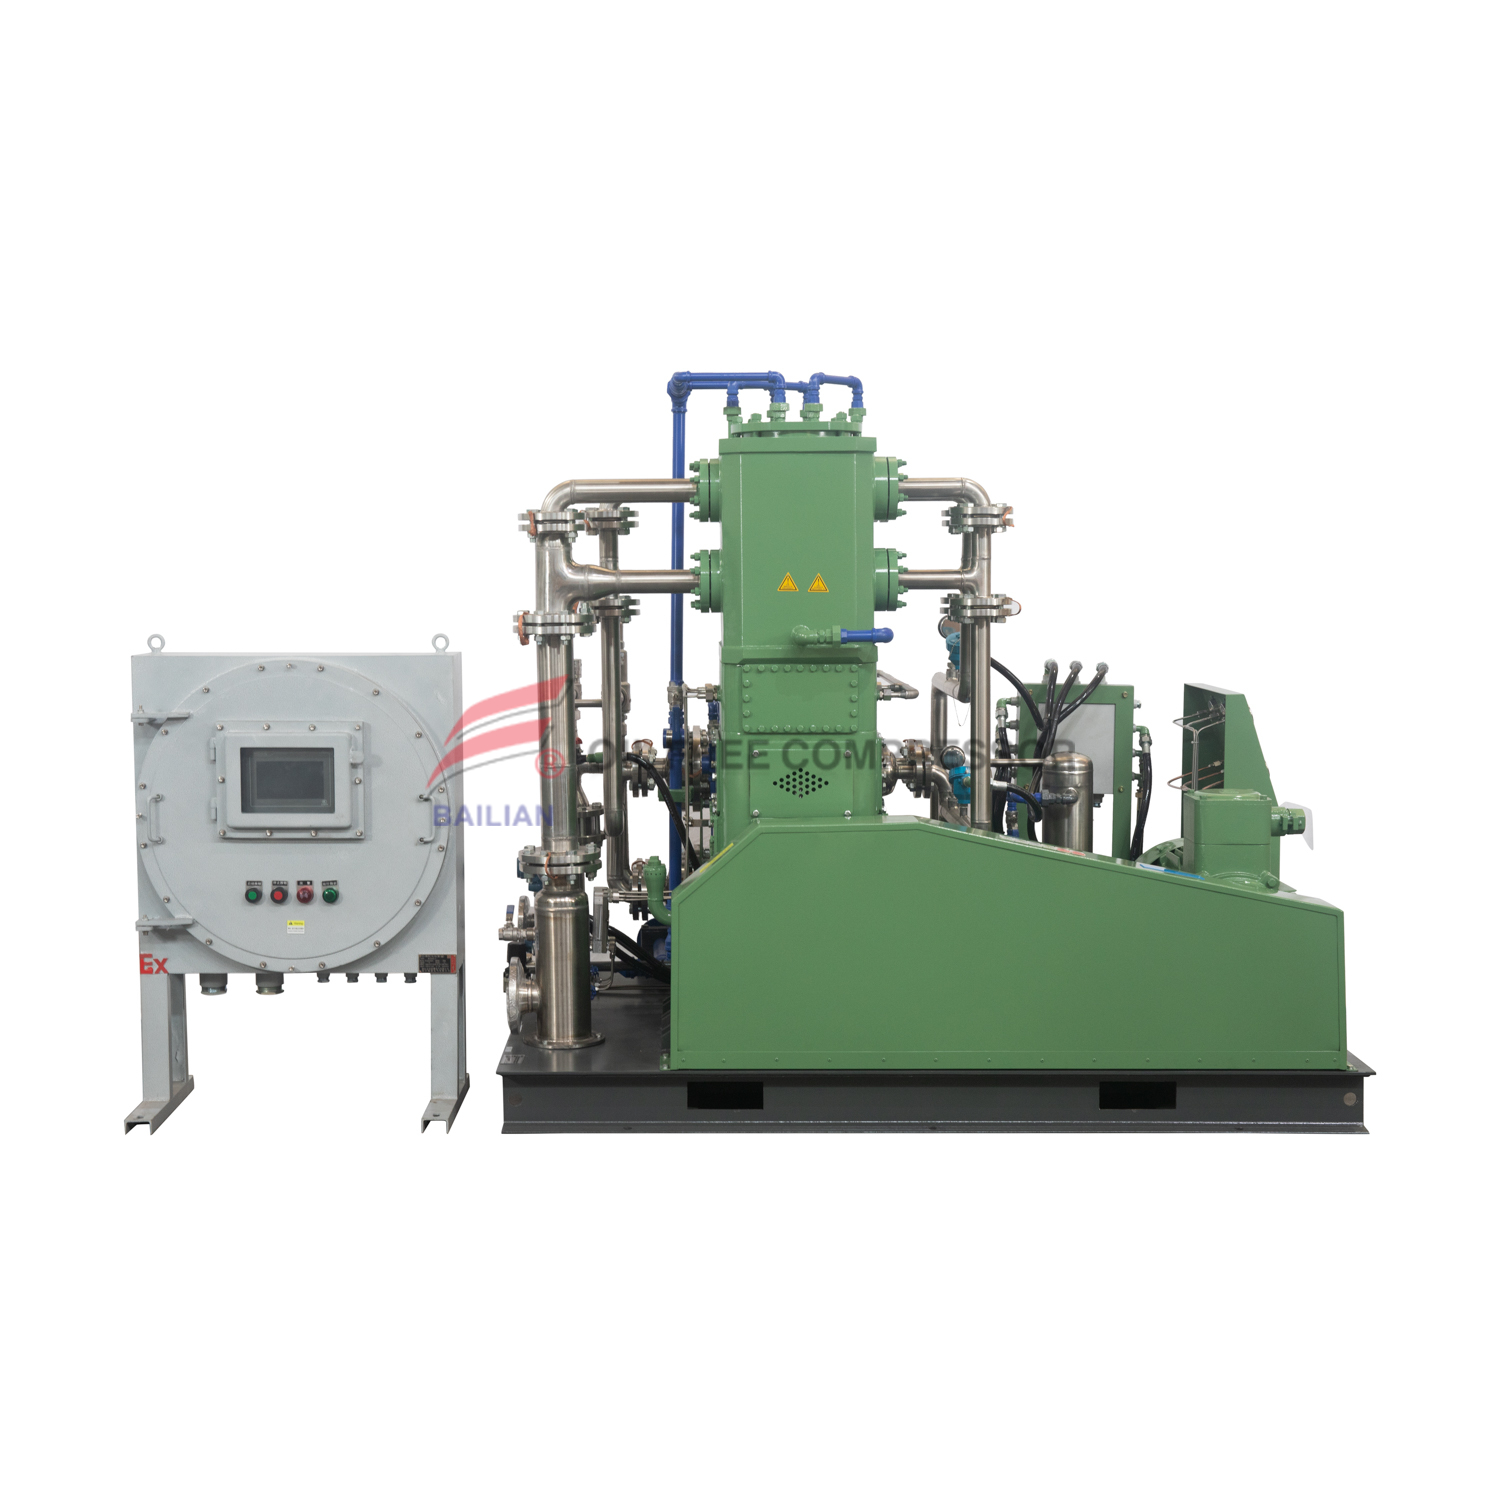 TZWH-240/10-23 Vertical Oil-free Pry Mounted Type H2 Compressor